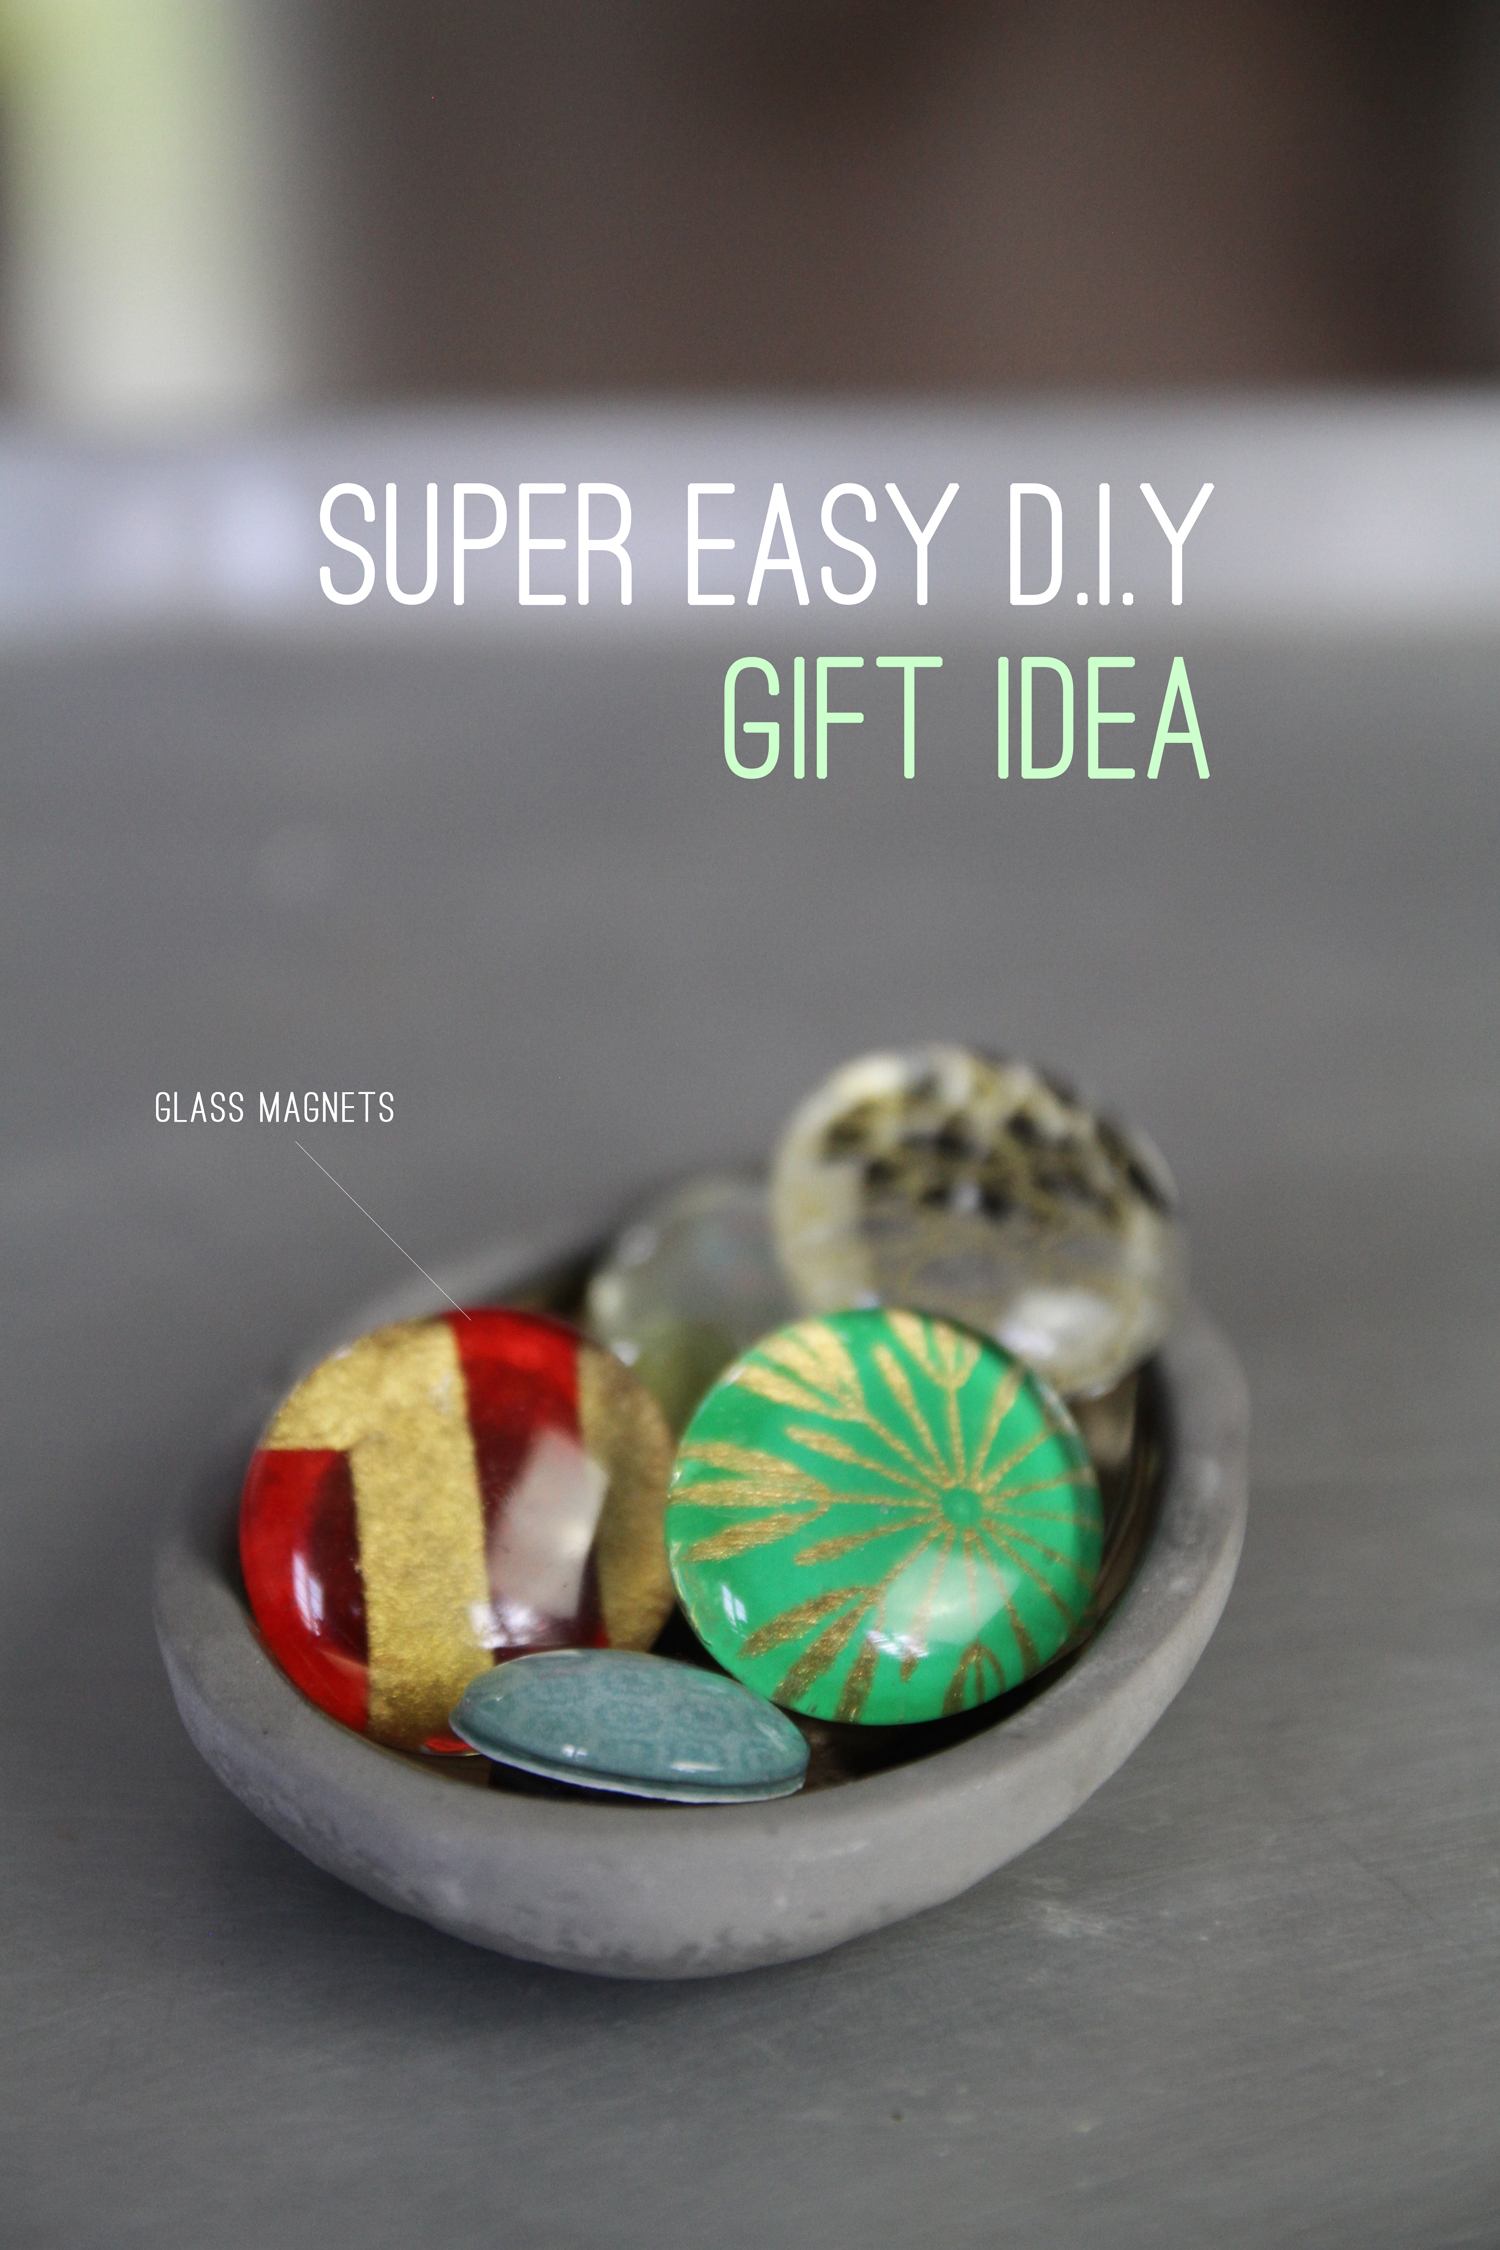 DIY Glass Magnets: The Package